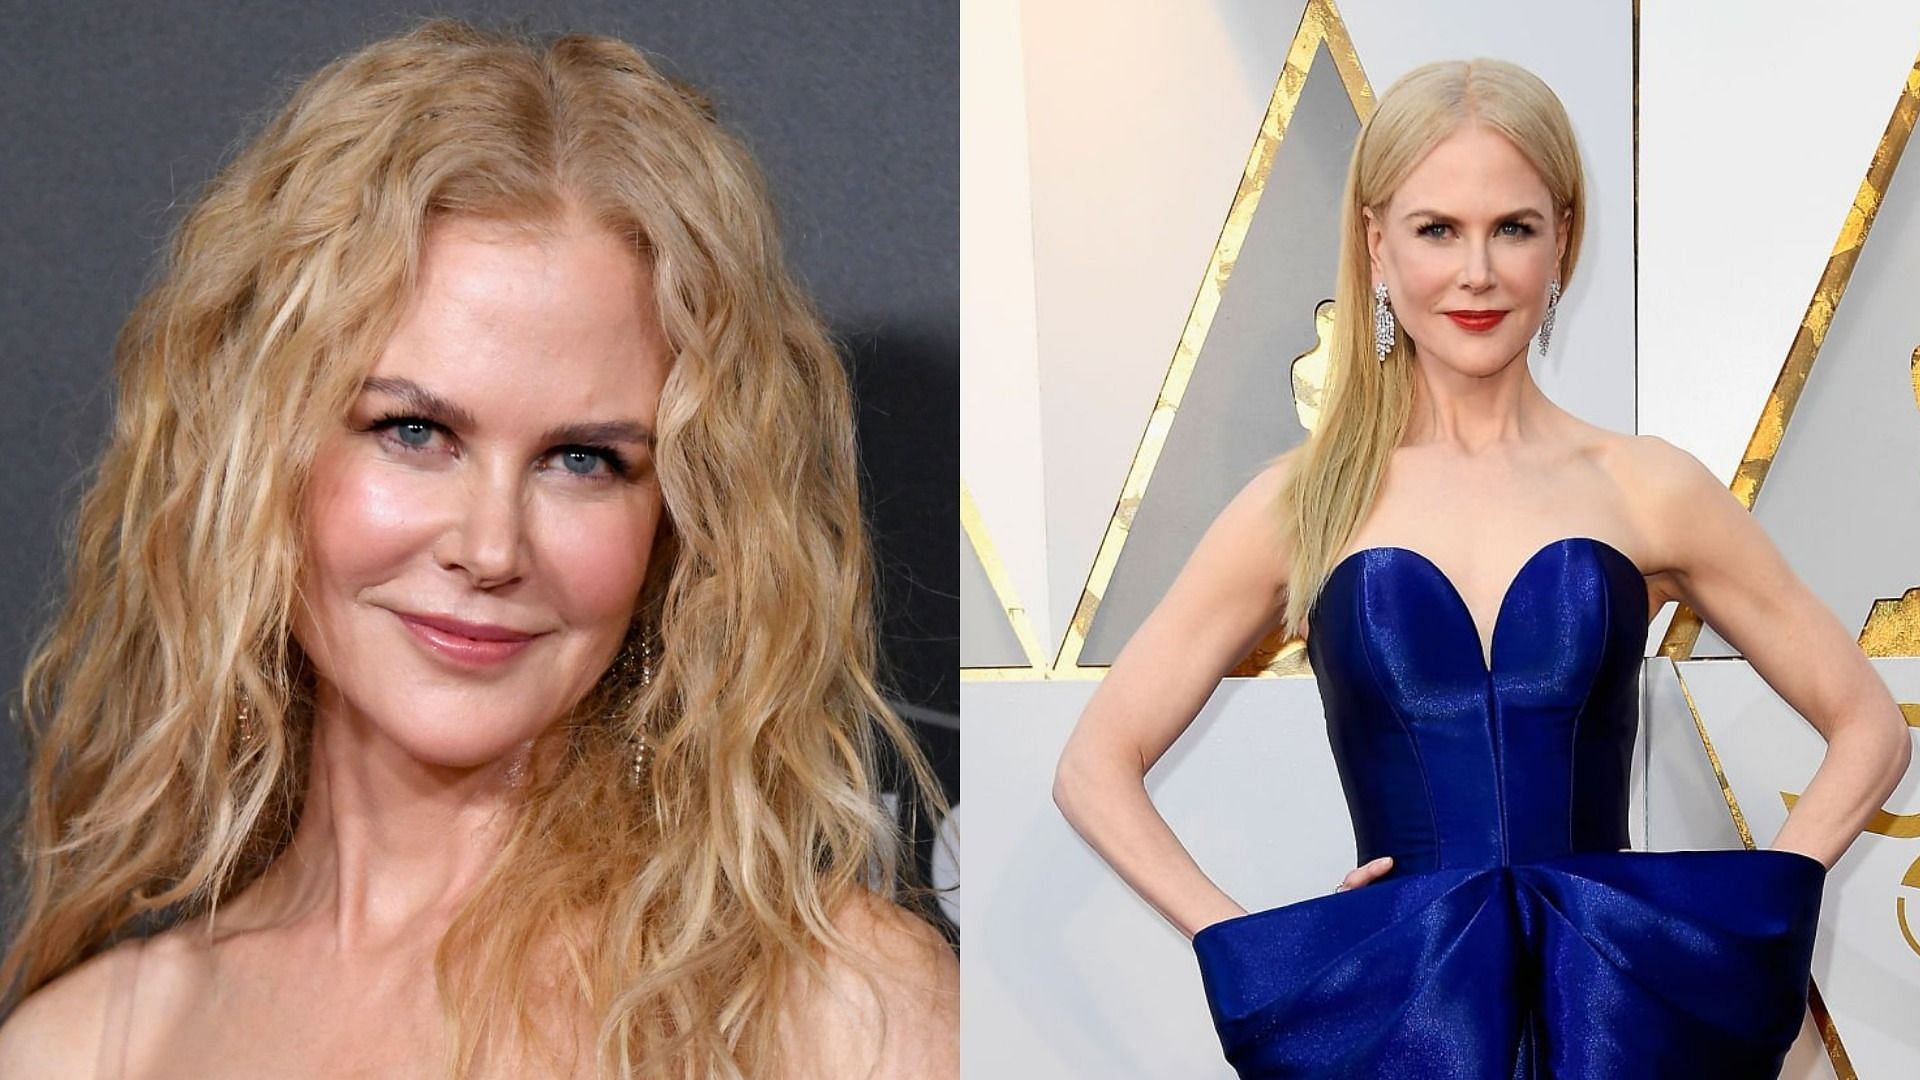 Nicole Kidman&#039;s Vanity Fair cover shoot receives a divisive response from fans (Image via Jon Kopaloff/Getty Images and Frazer Harrison/Getty Images)